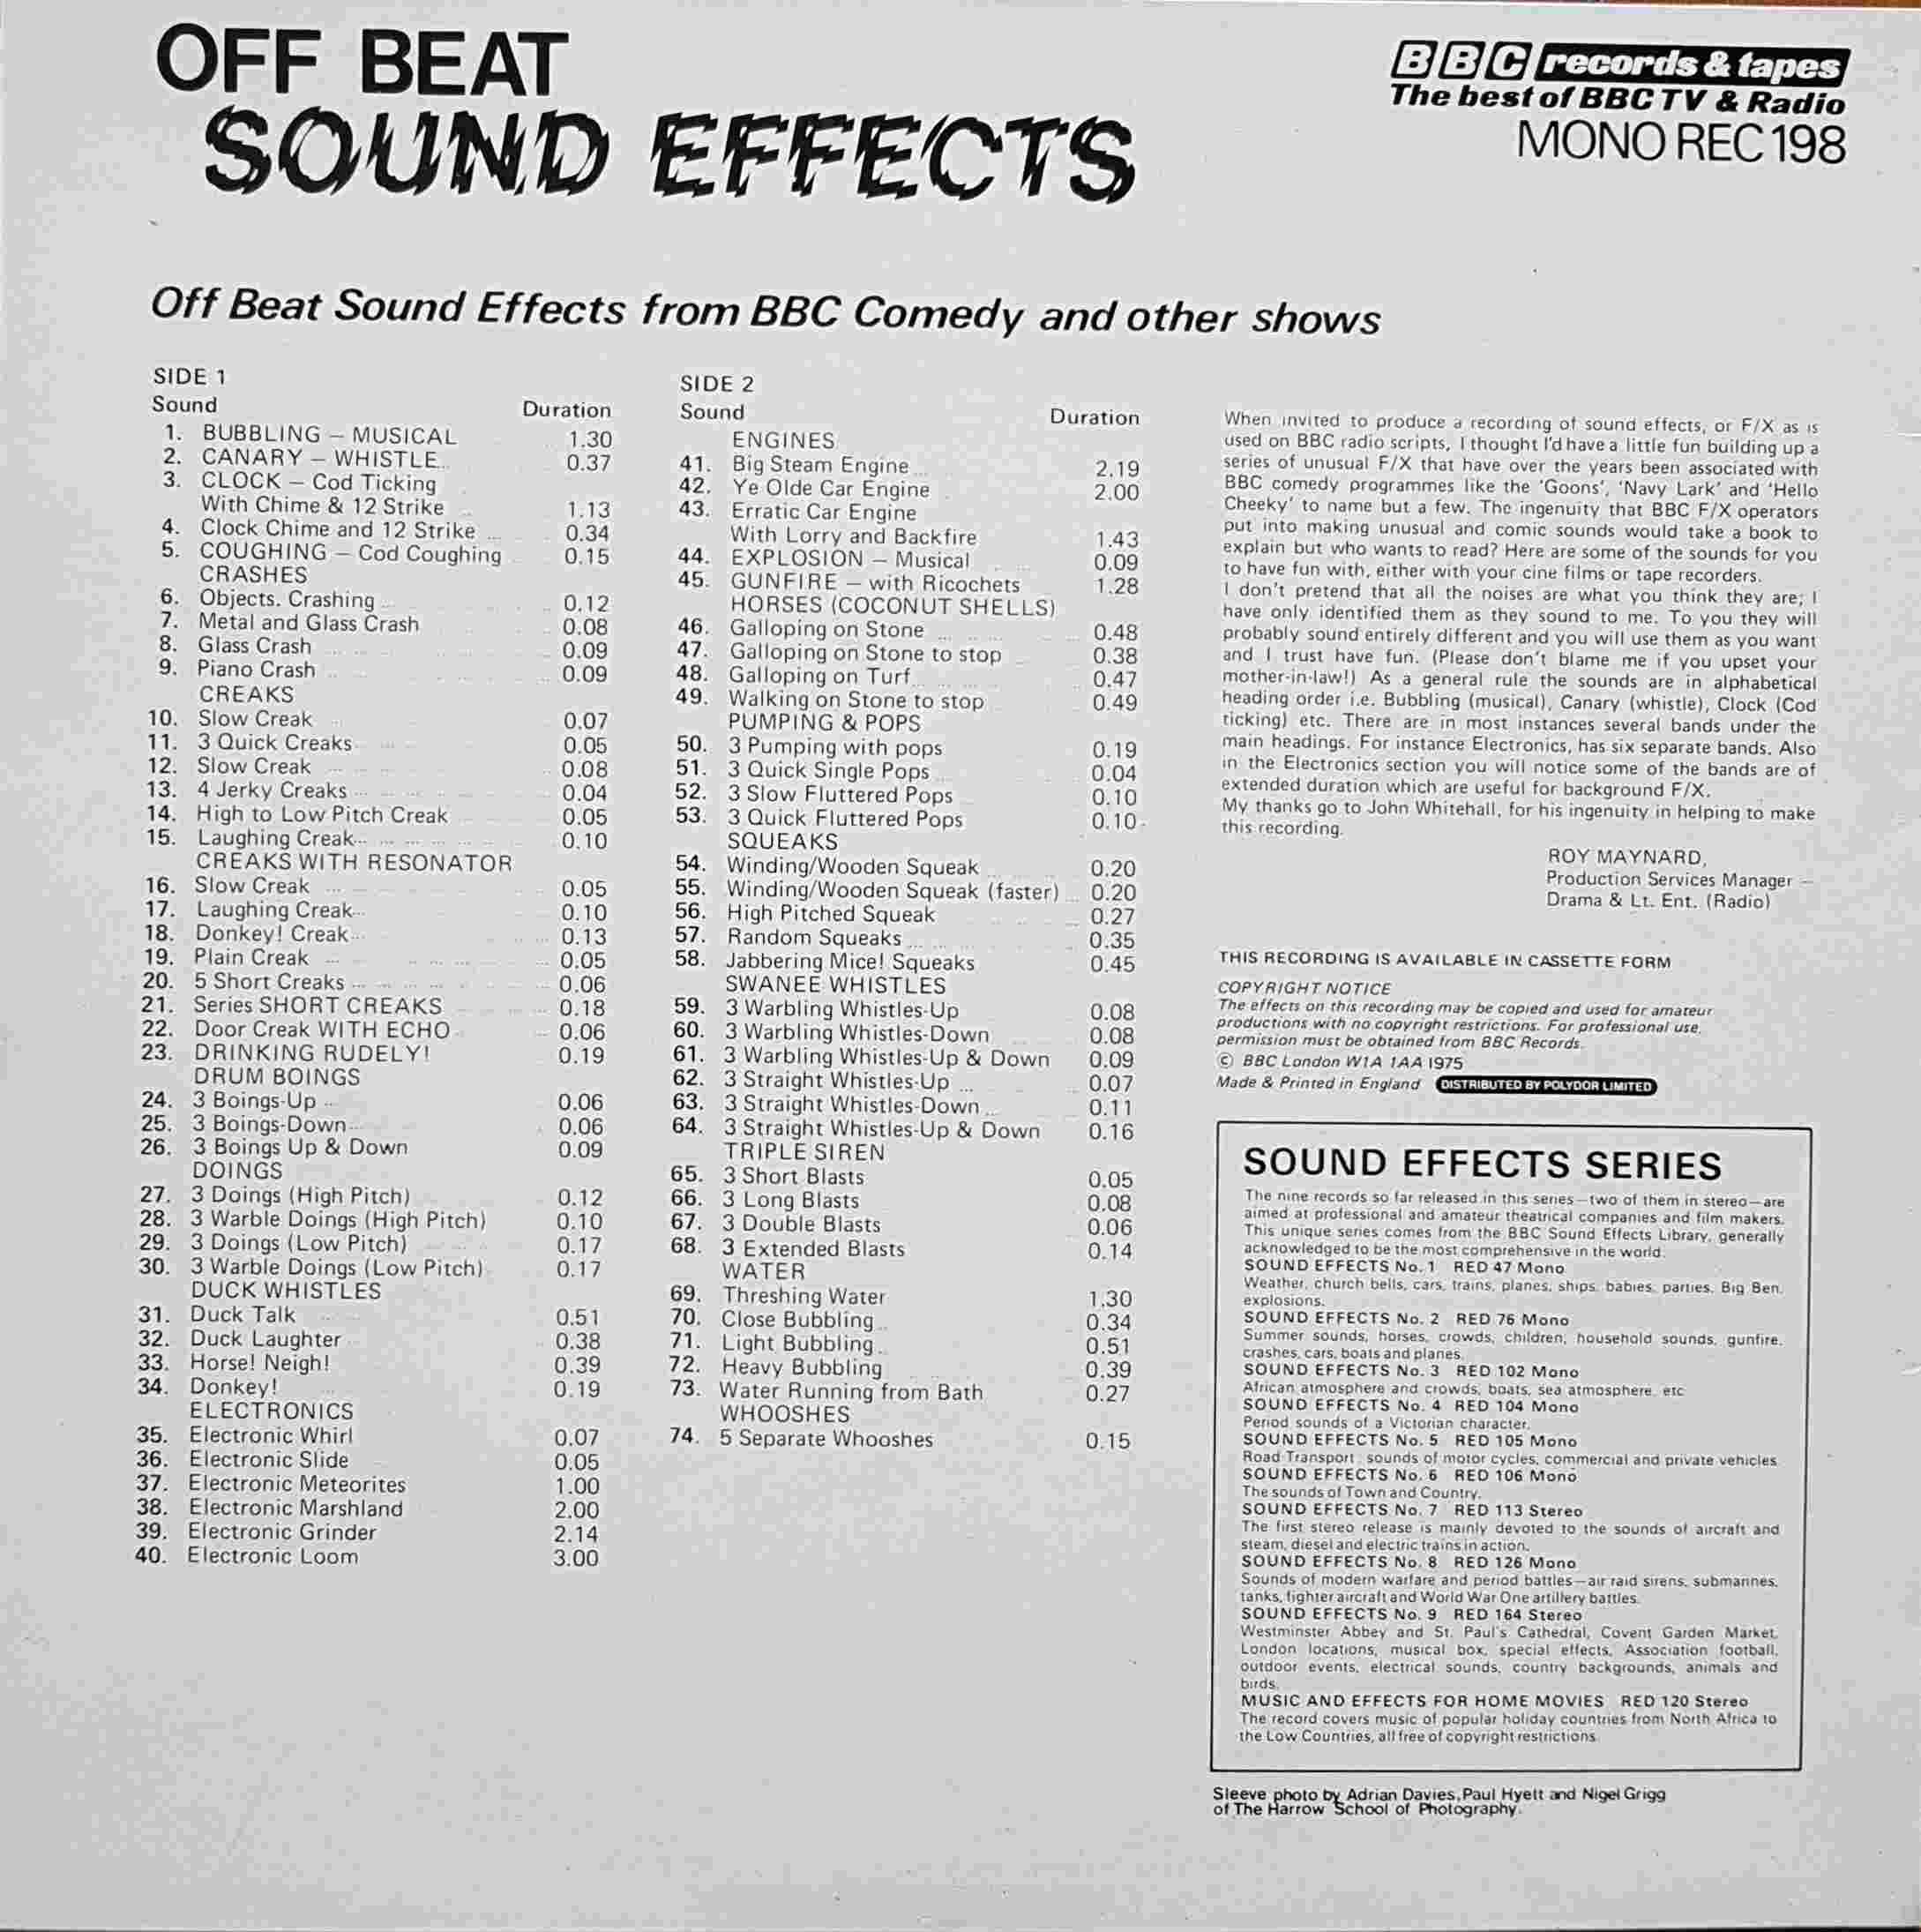 Picture of REC 198 Off beat sound effects by artist Various from the BBC records and Tapes library